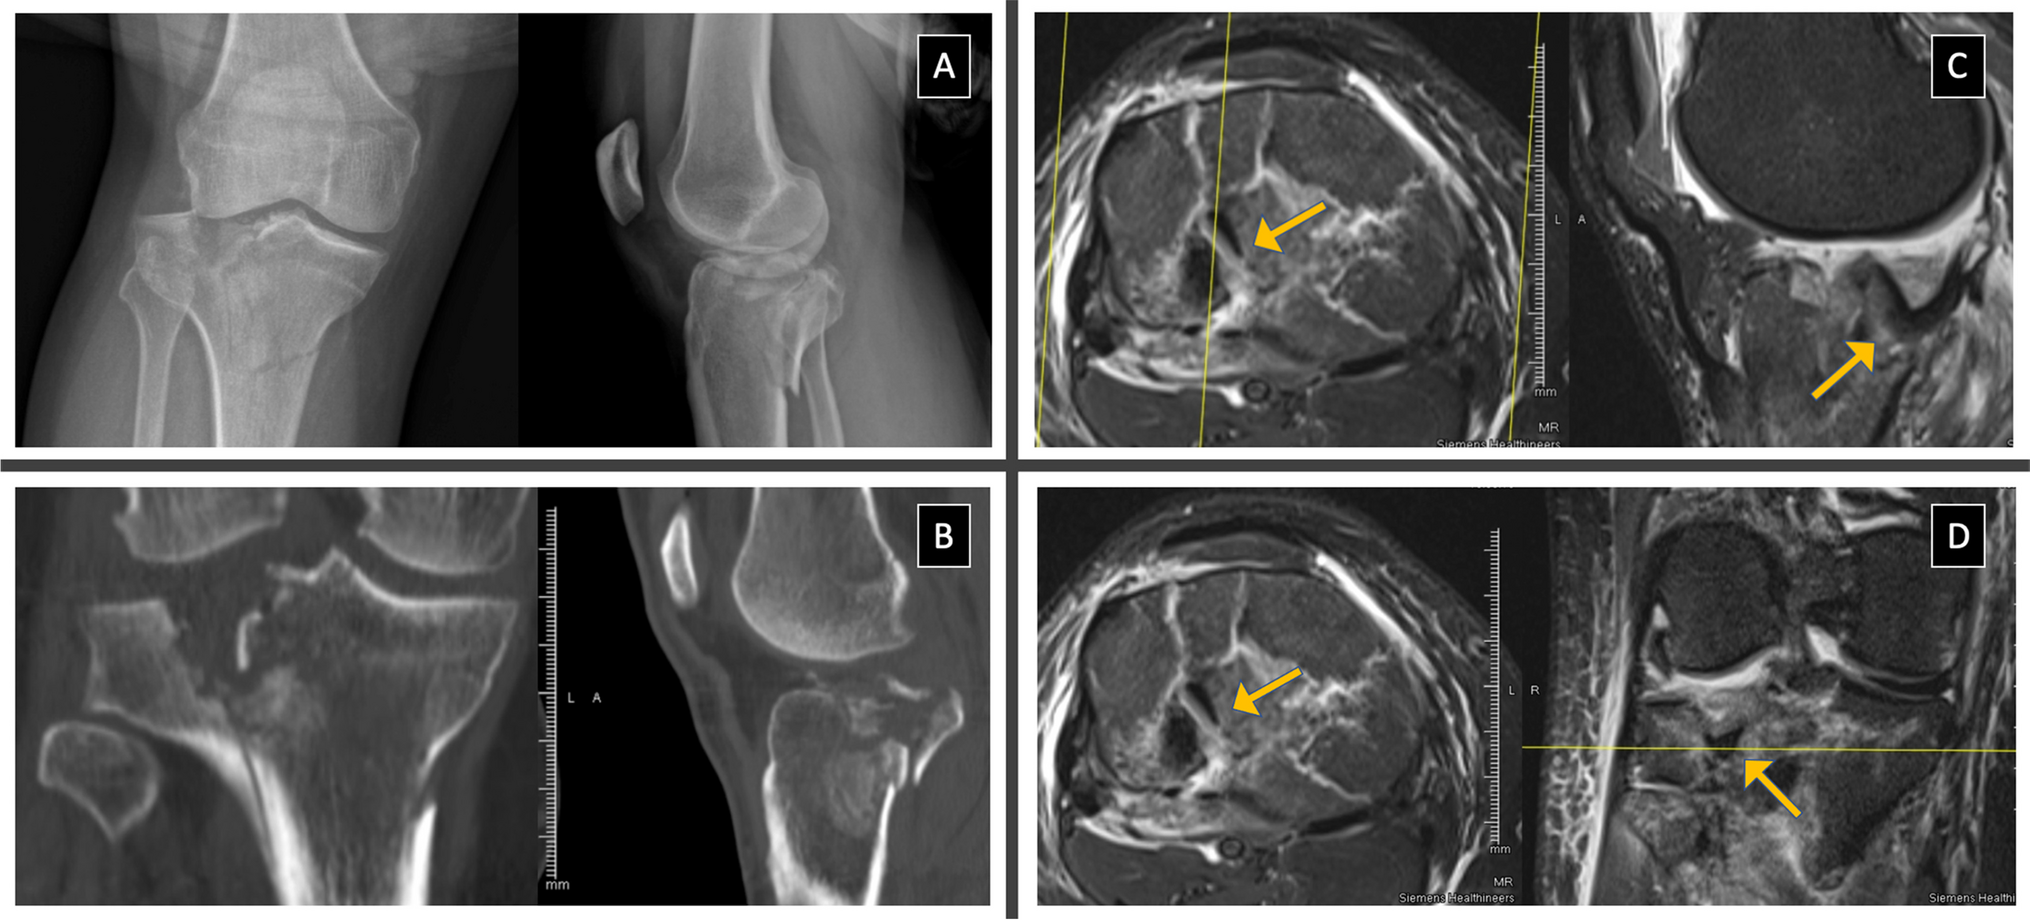 Tibial plateau fractures are associated with ligamentous and meniscal injuries. Preoperative evaluation of magnetic resonance imaging influences surgical treatment